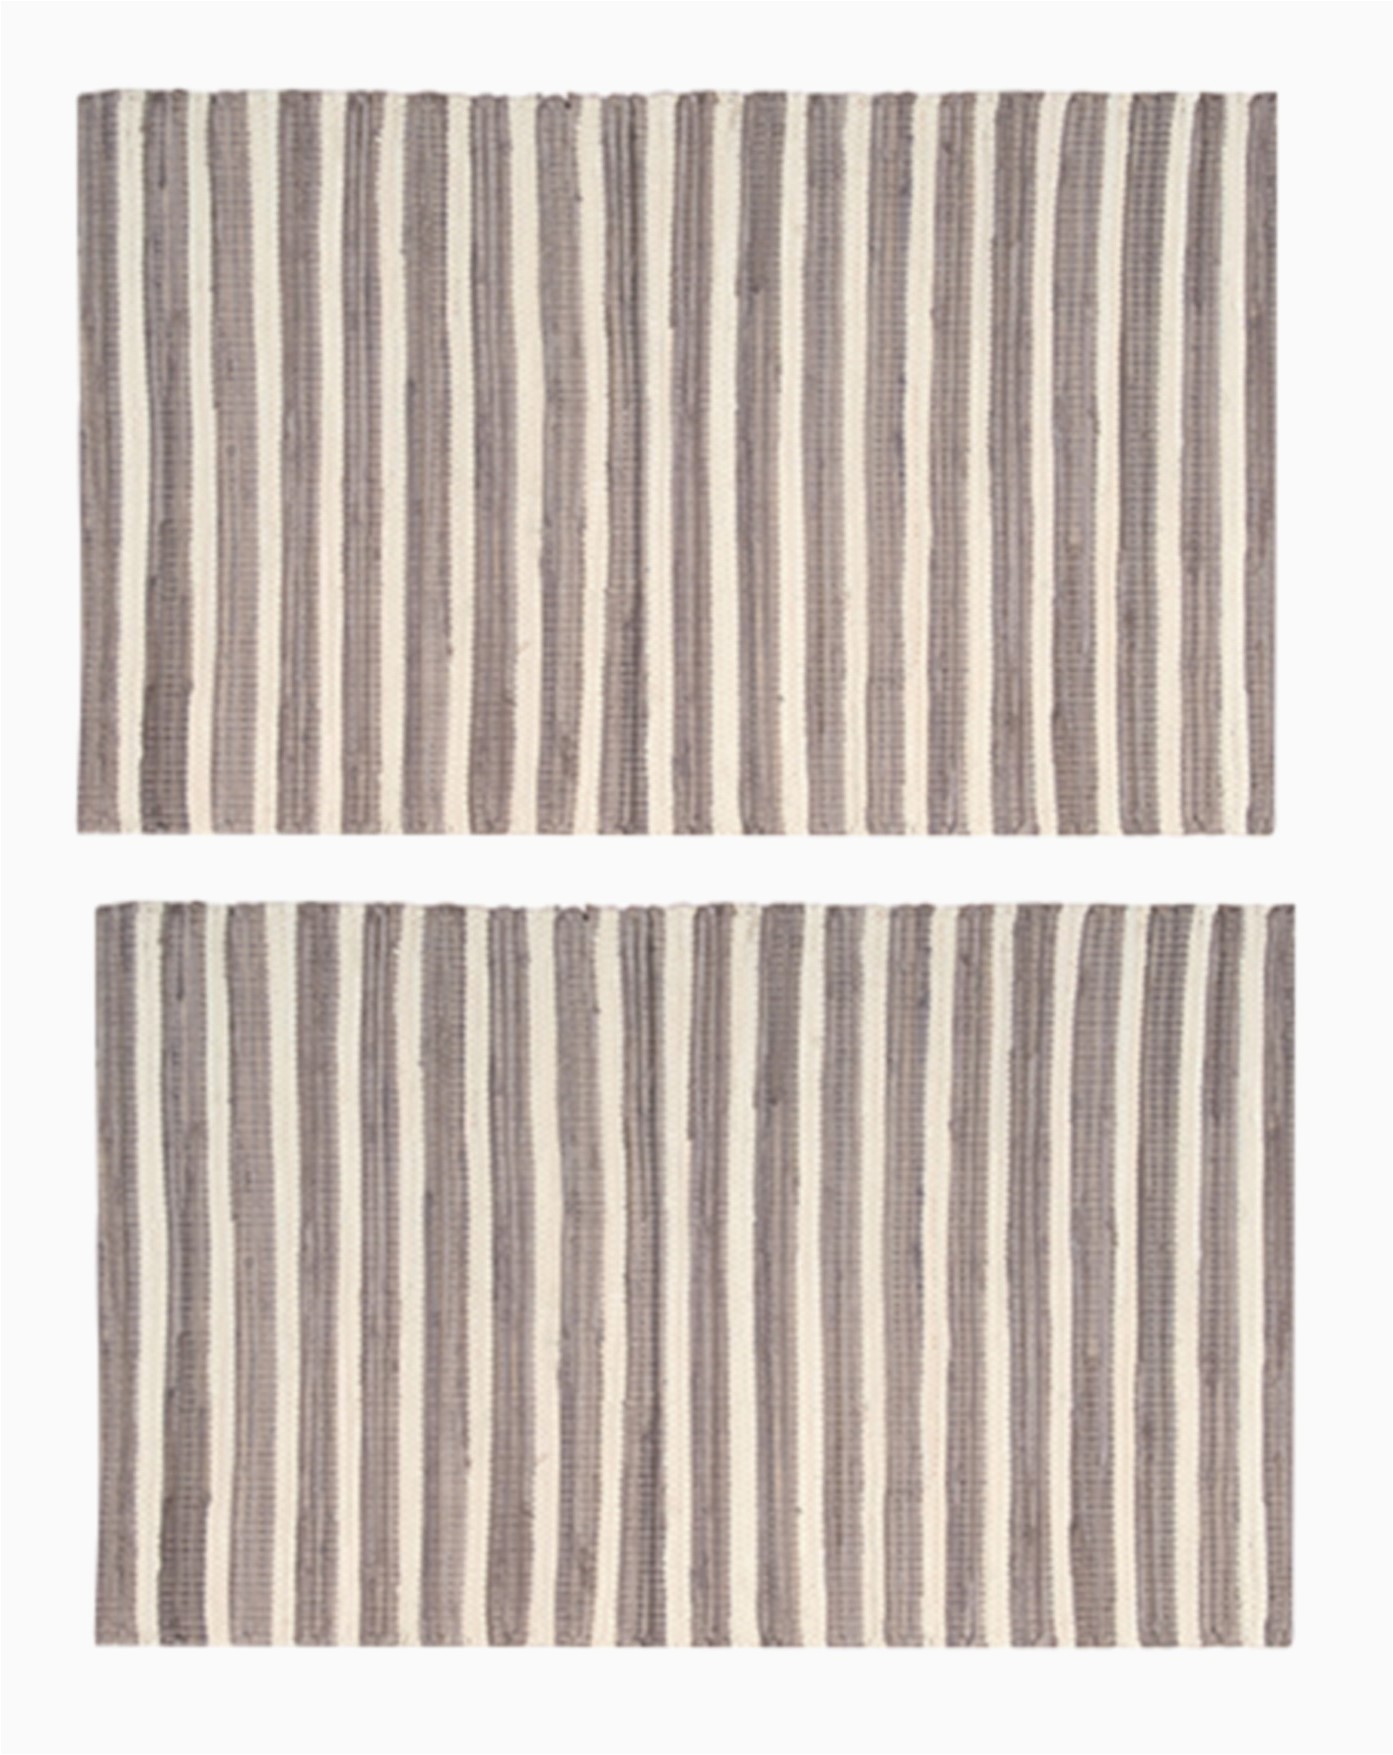 Area Rug 36 X 48 Details About 2 Pack Nourison Brunswick Stripe Accent Floor area Rugs 24" X 36" or 30" X 48"